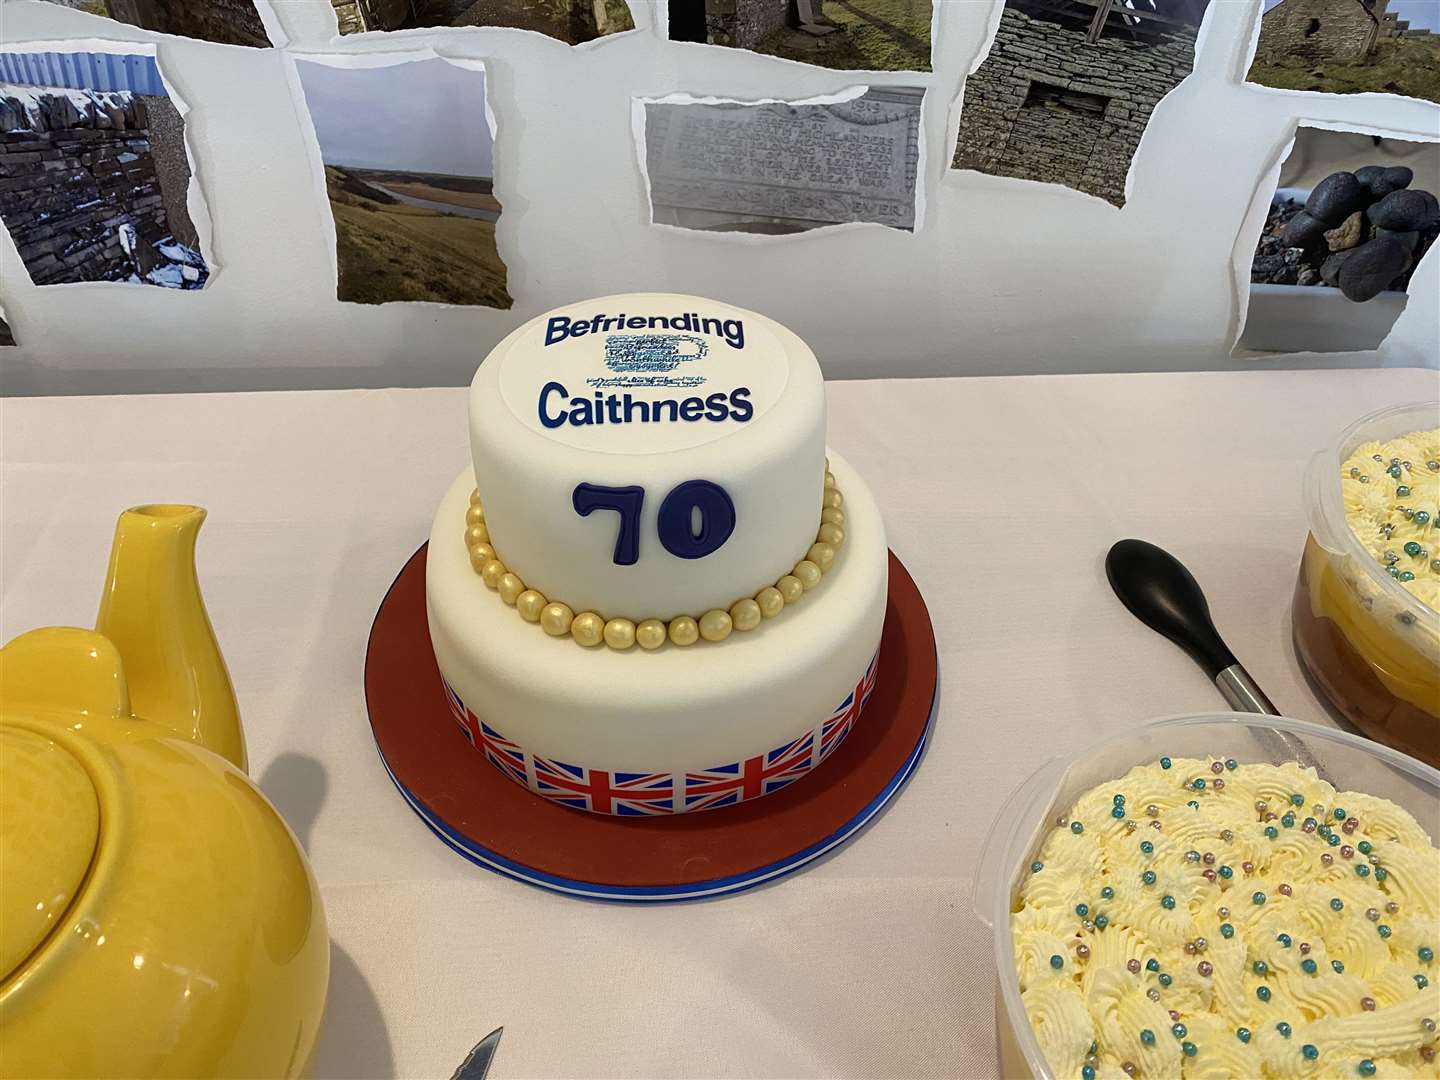 A special cake celebrating the Queen's Platinum Jubilee.